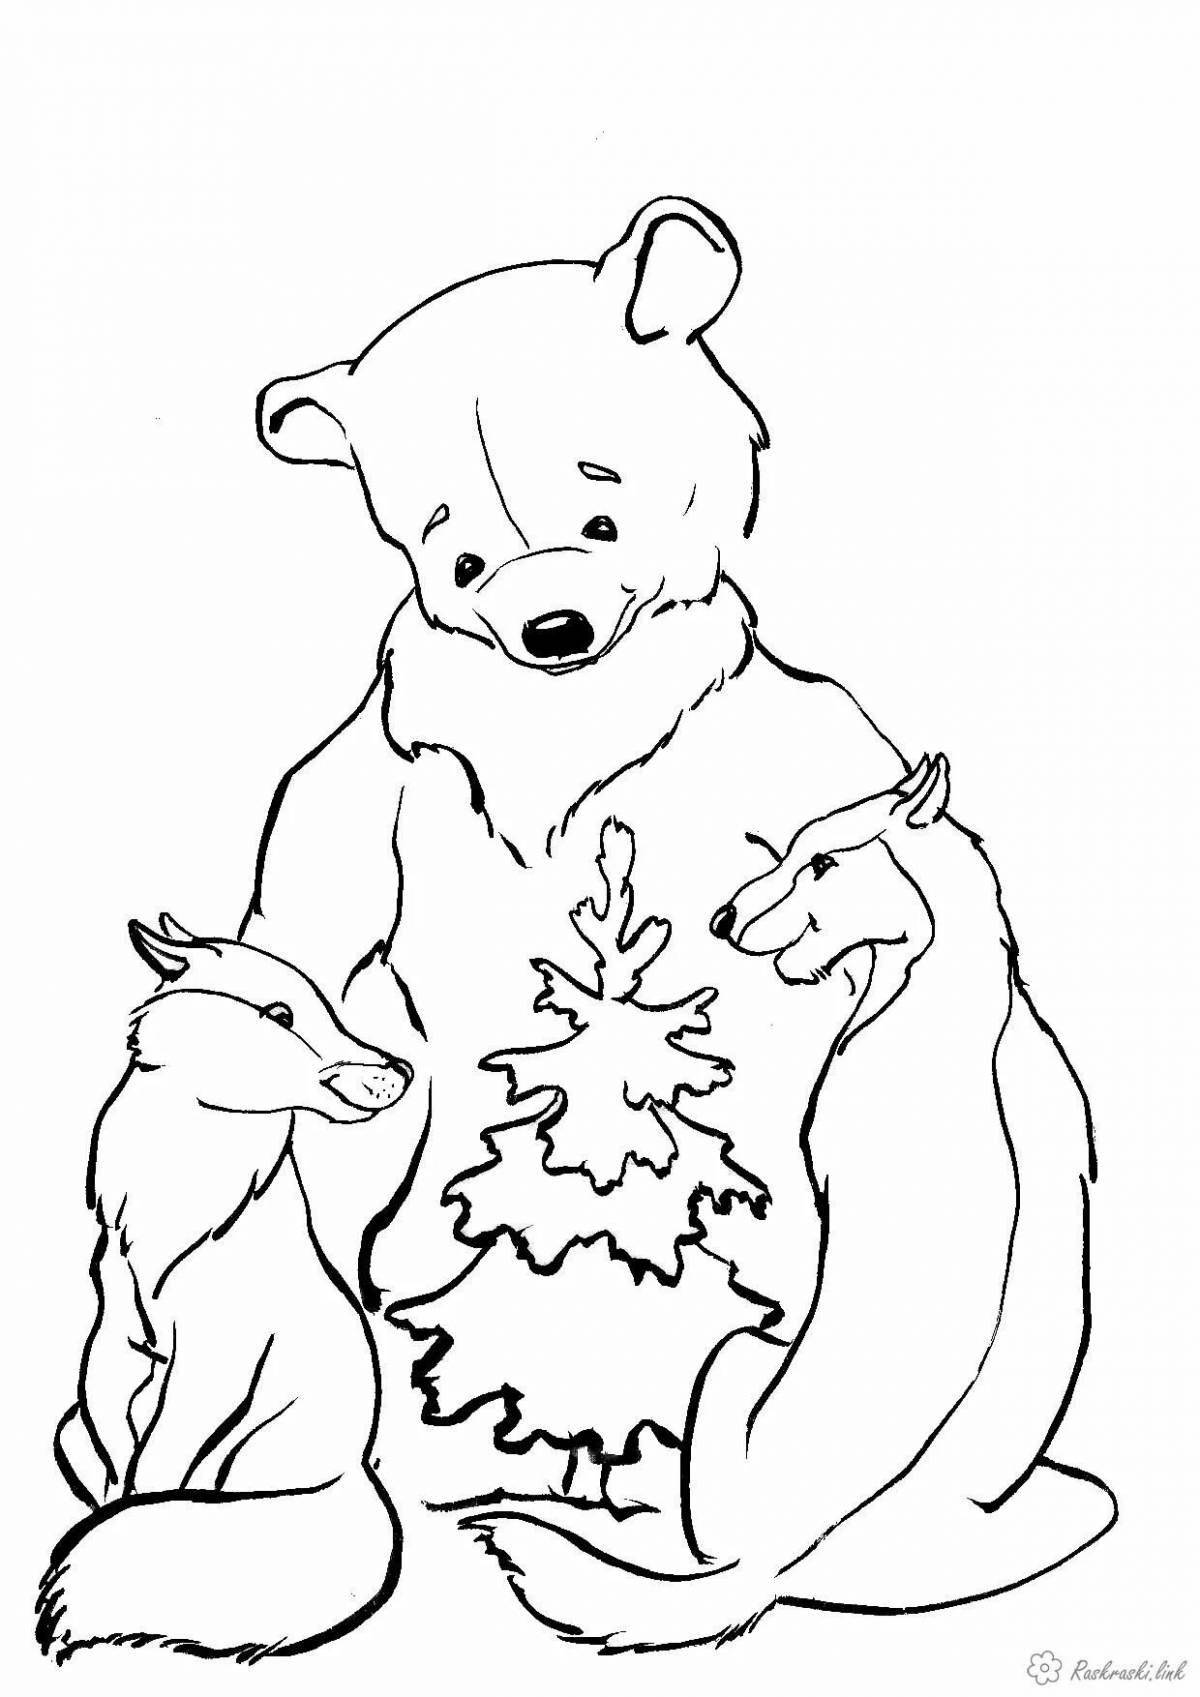 Gorgeous bear and fox coloring book